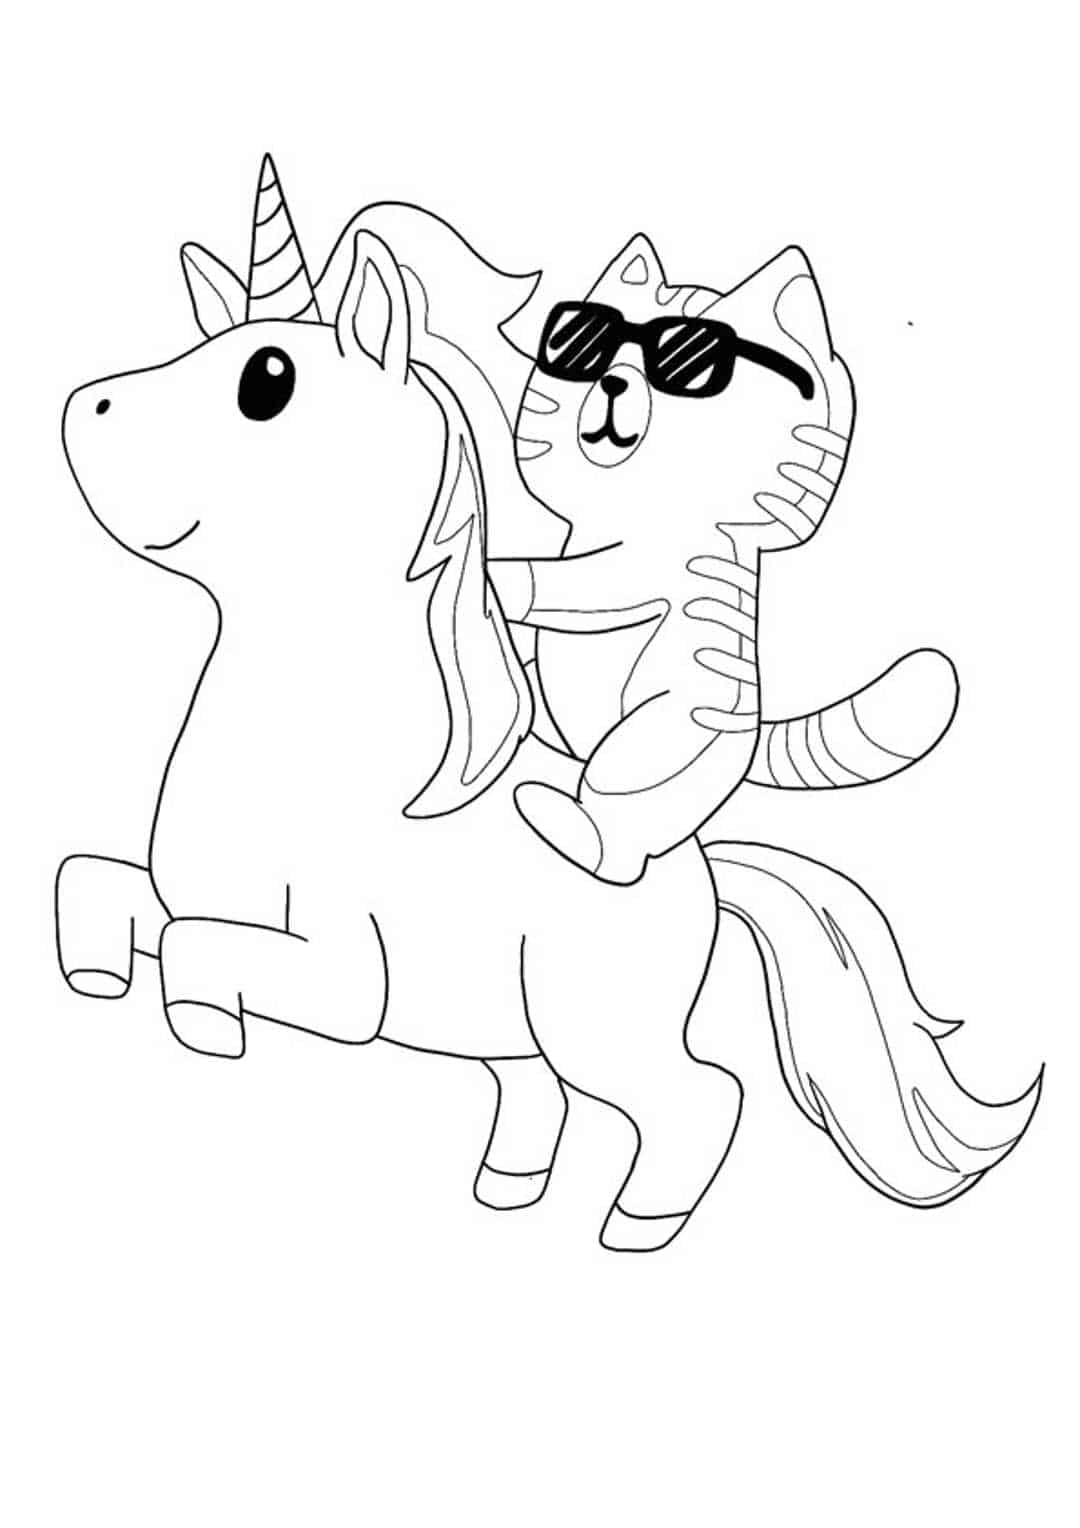 Cat Coloring Pages   Coloring Pages For Kids And Adults